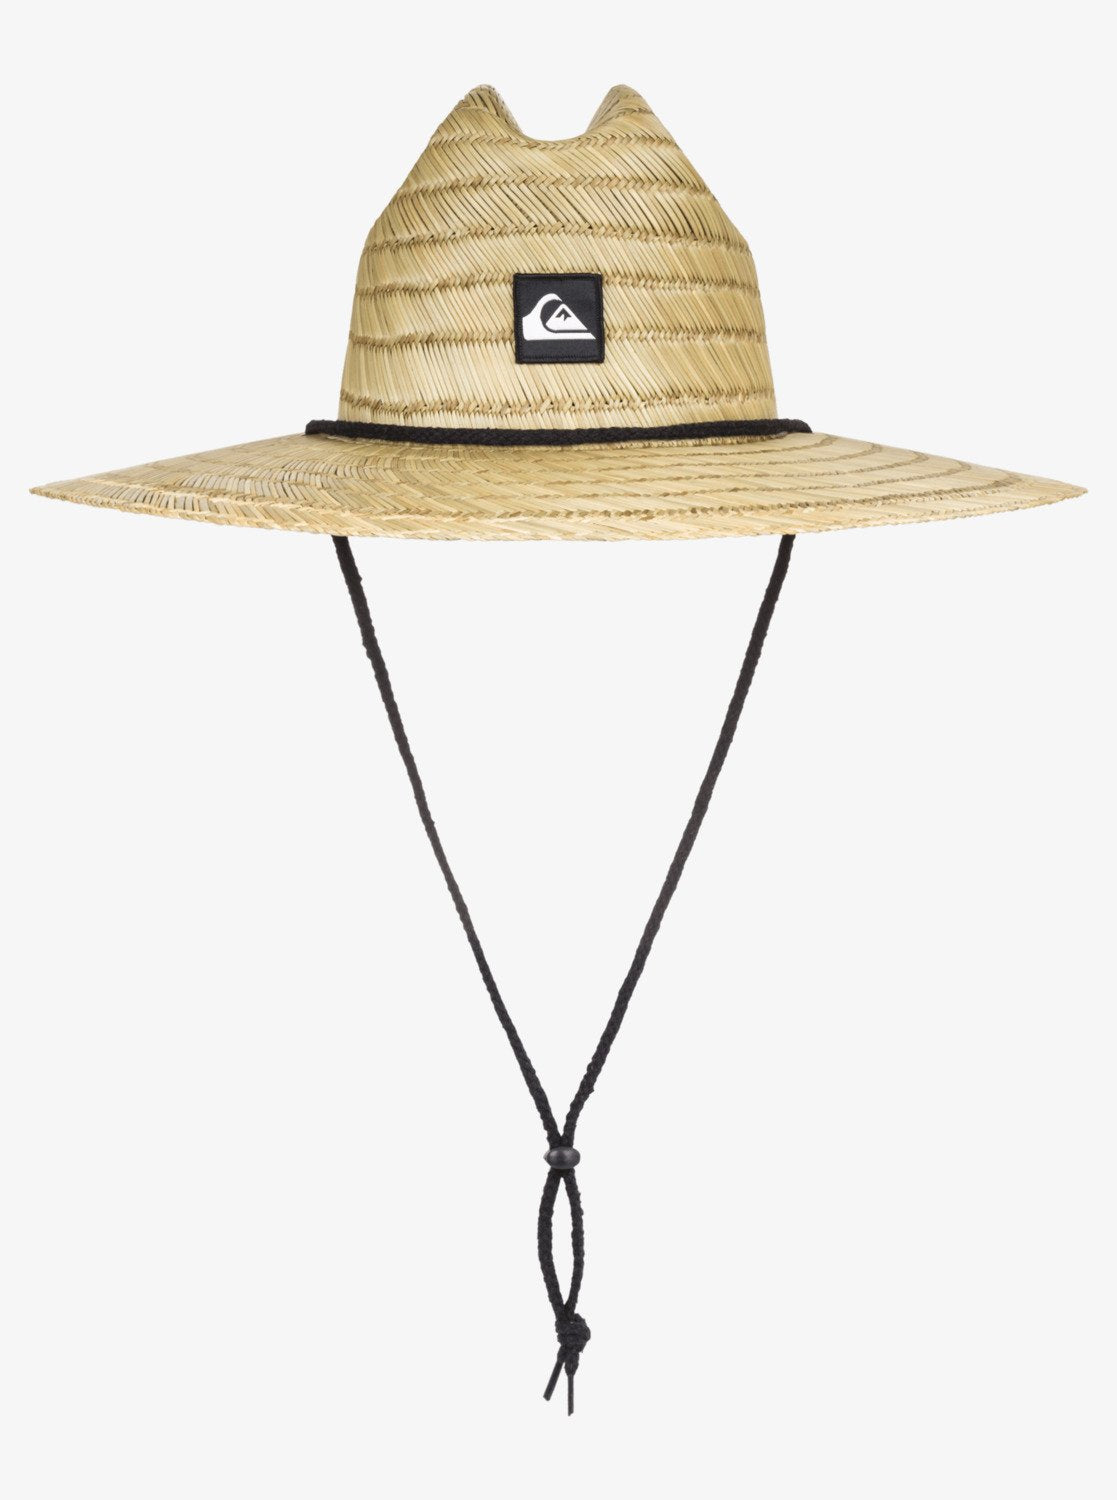 Quiksilver Pierside Straw Hat in natural colour with black quiksilver patch